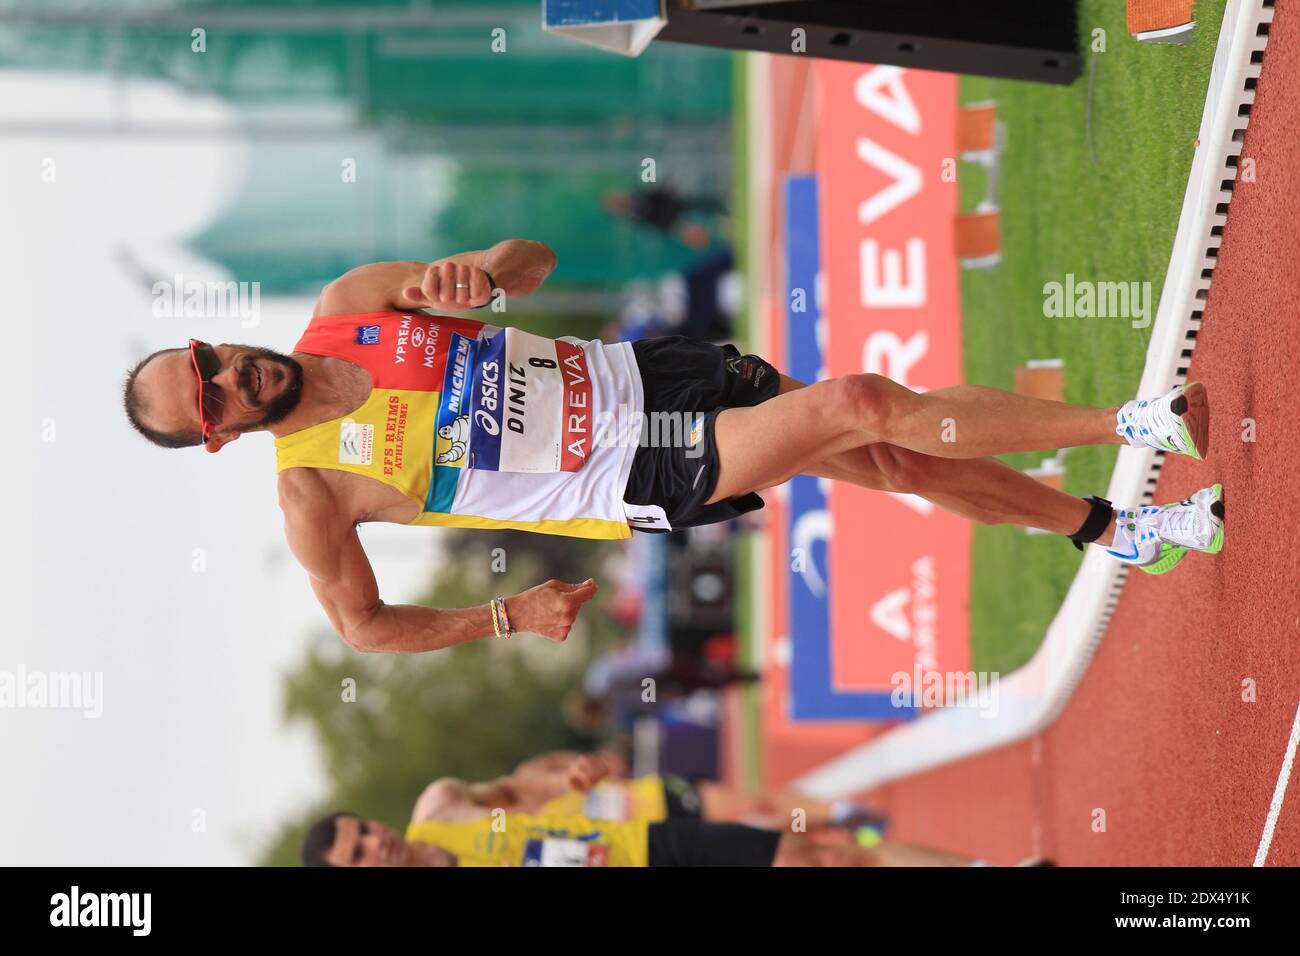 Yohann Diniz during the Elite French Championships 2014, at the Georges-Hebert Stadium, in Reims, France, on July 13, 2014. Photo by Pasco/ABACAPRESS.COM Stock Photo